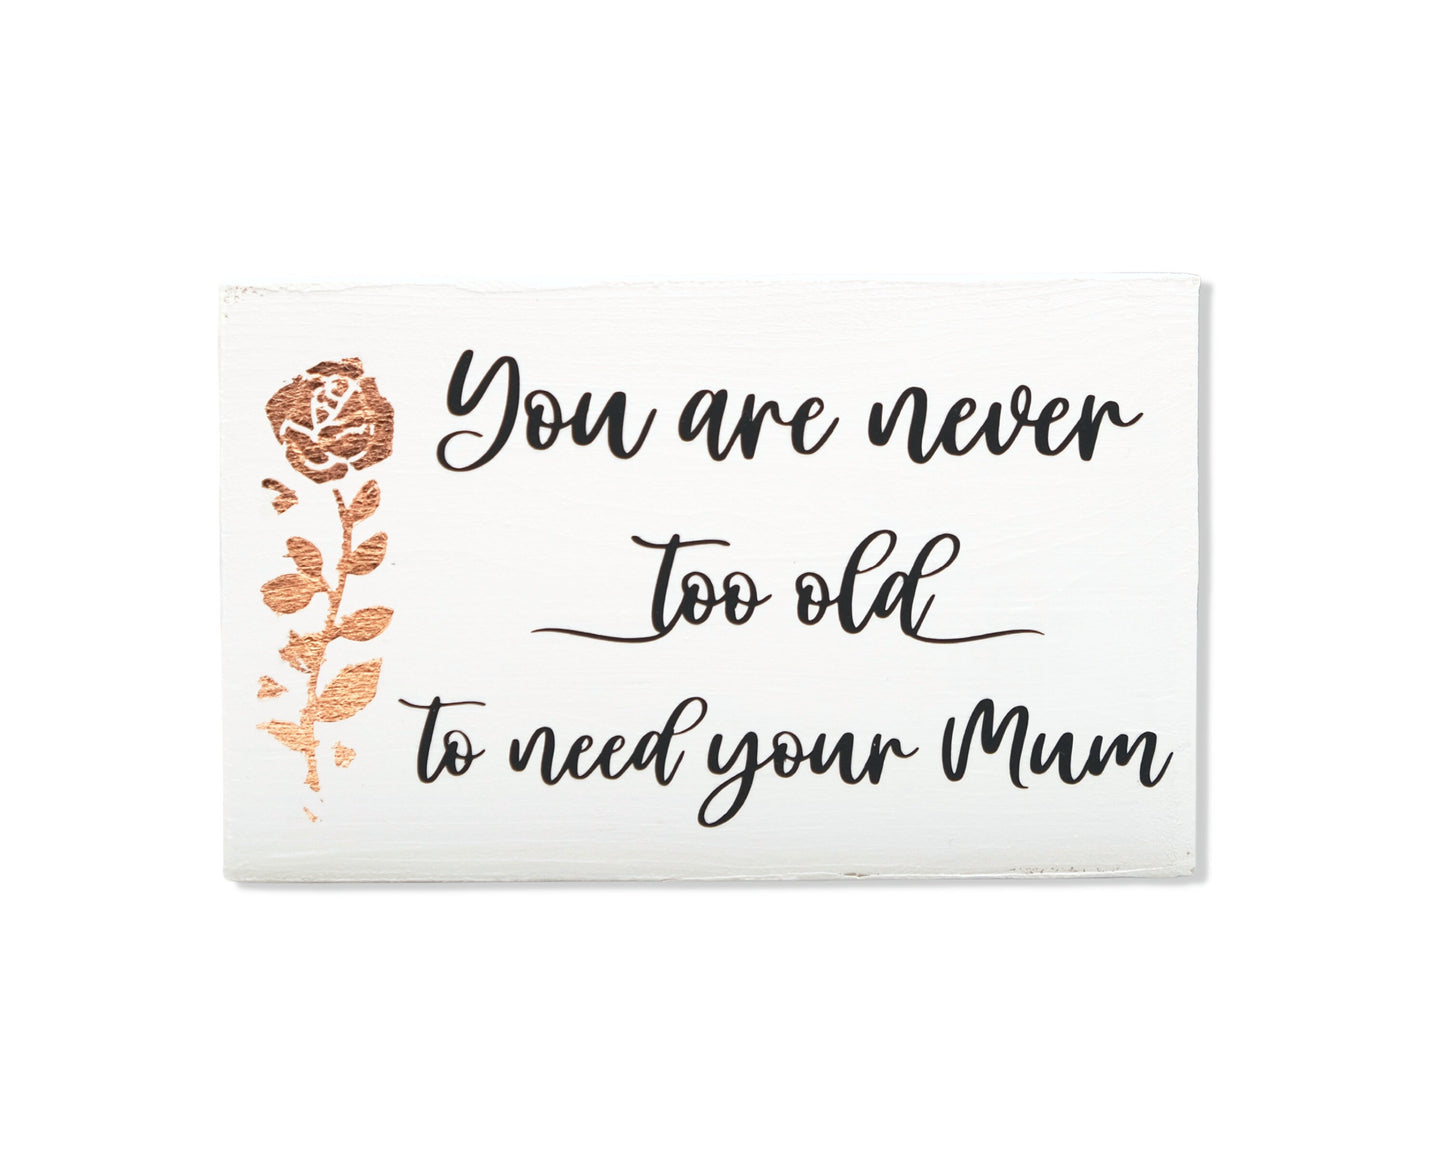 Small freestanding rectangular wooden sign facing straight on. White wood stain, bronze rose gold tall rose flower on left side. Black message in emotive font, You are never too old to need your Mum. Studio style photo on white background.